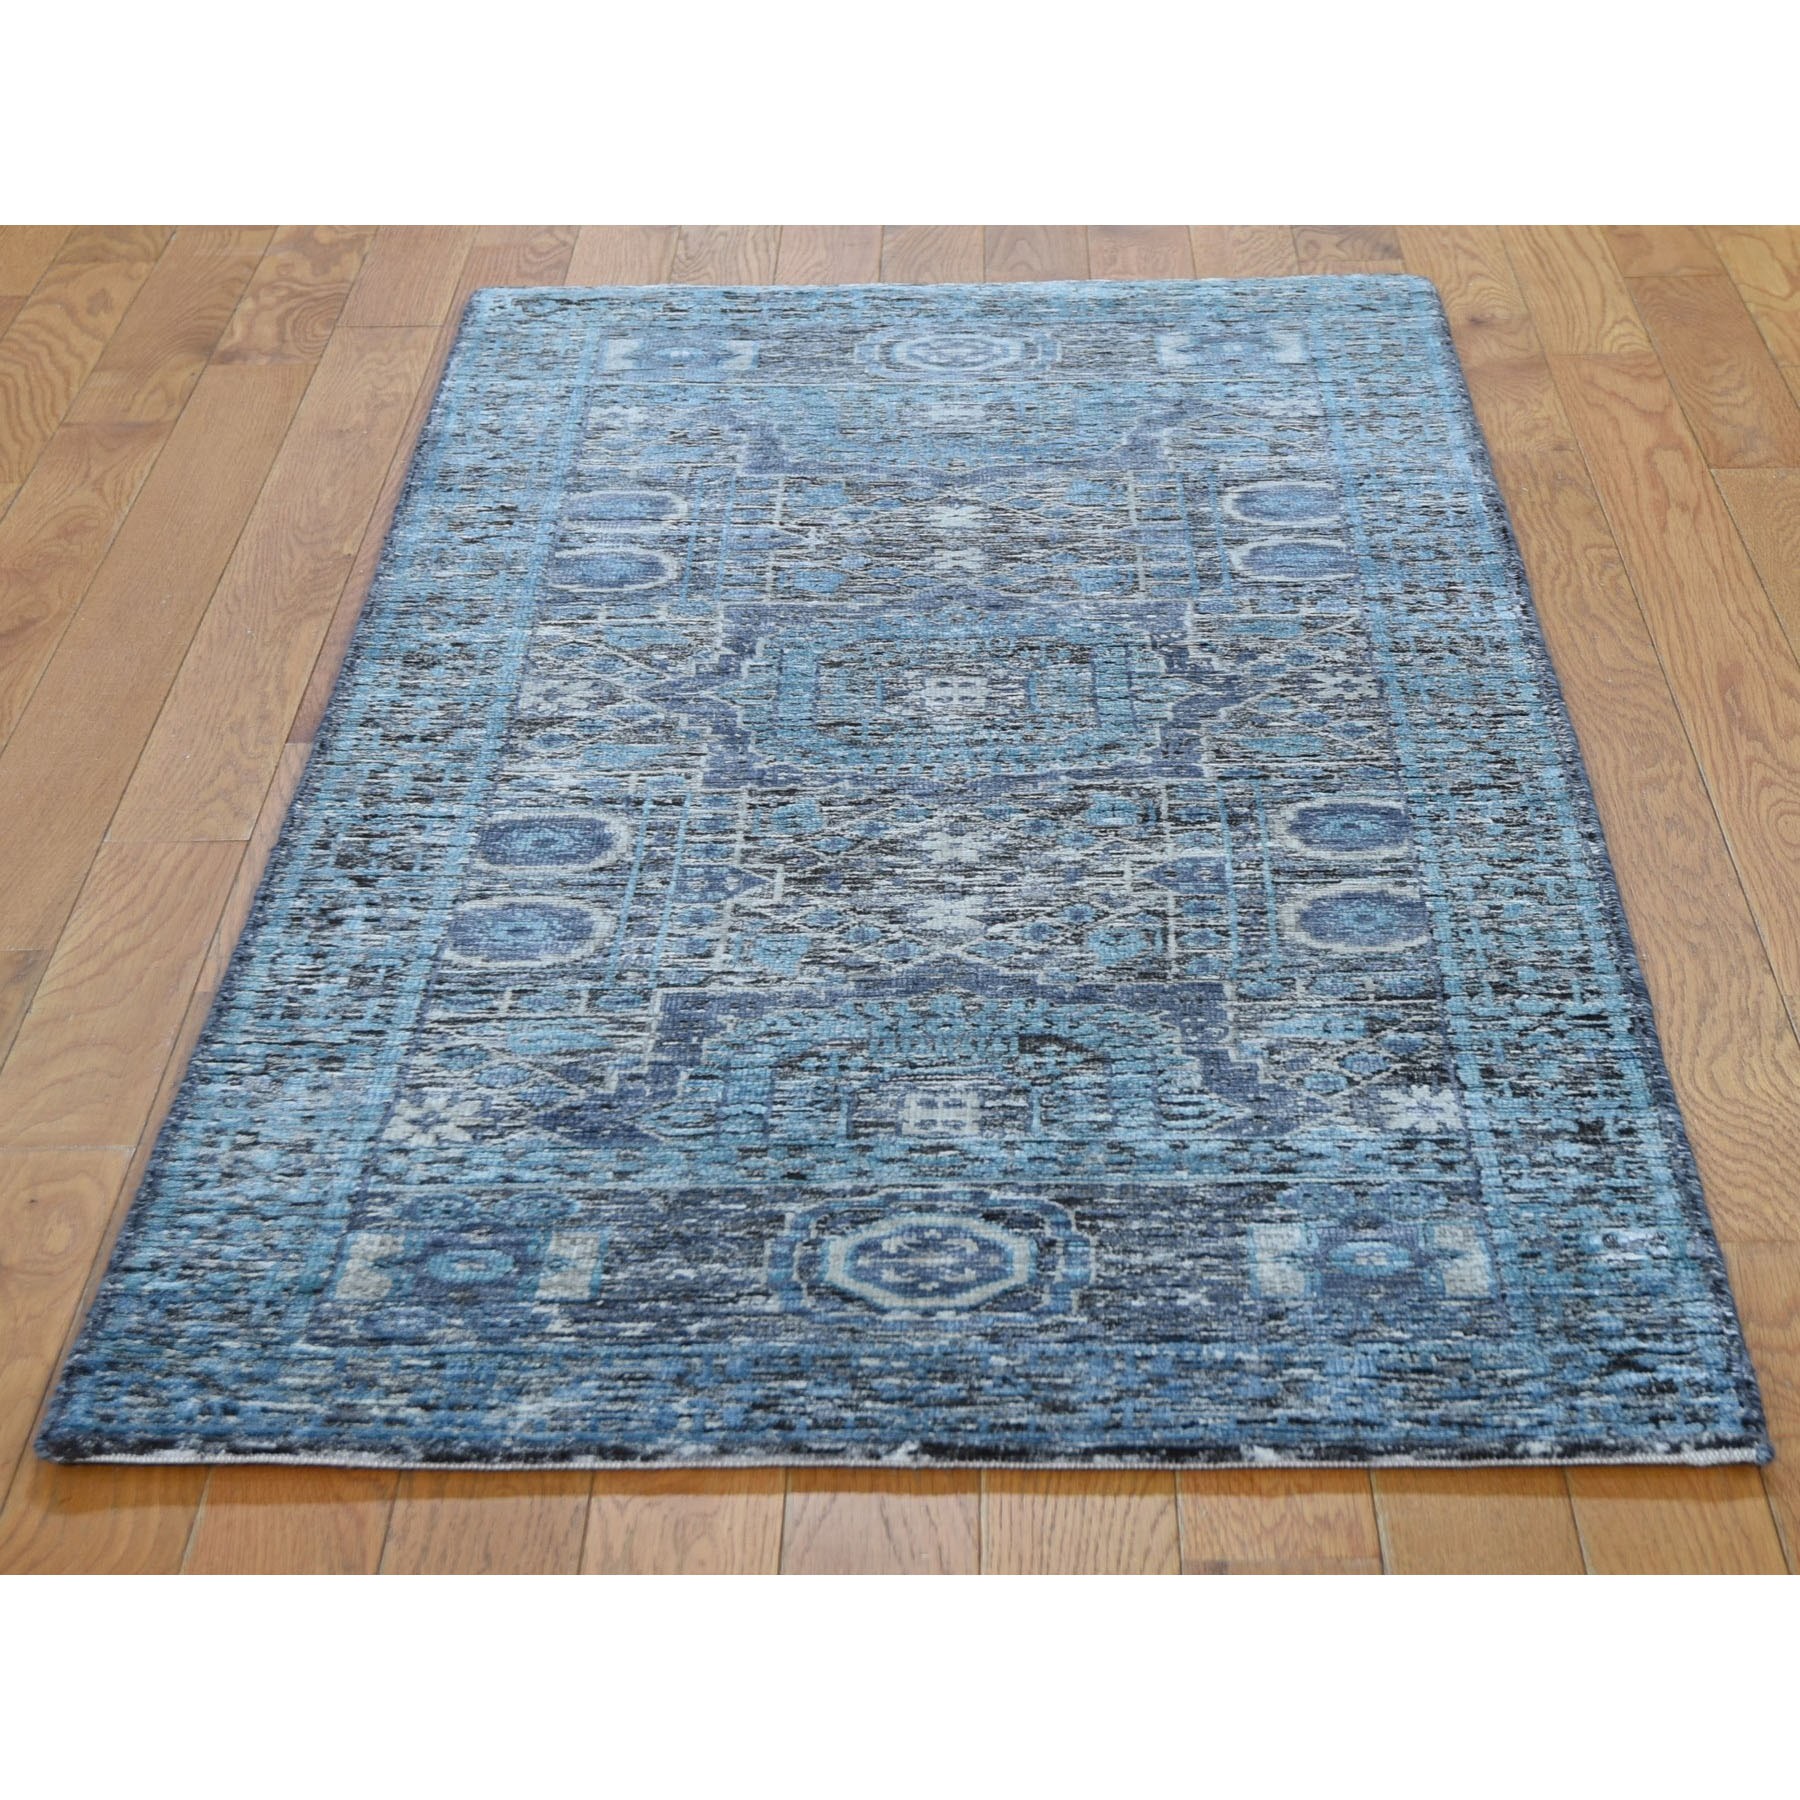 2-5 x6- Silk With Textured Wool Hi-Low Pile Mamluk Design Runner Hand Knotted Oriental Rug 